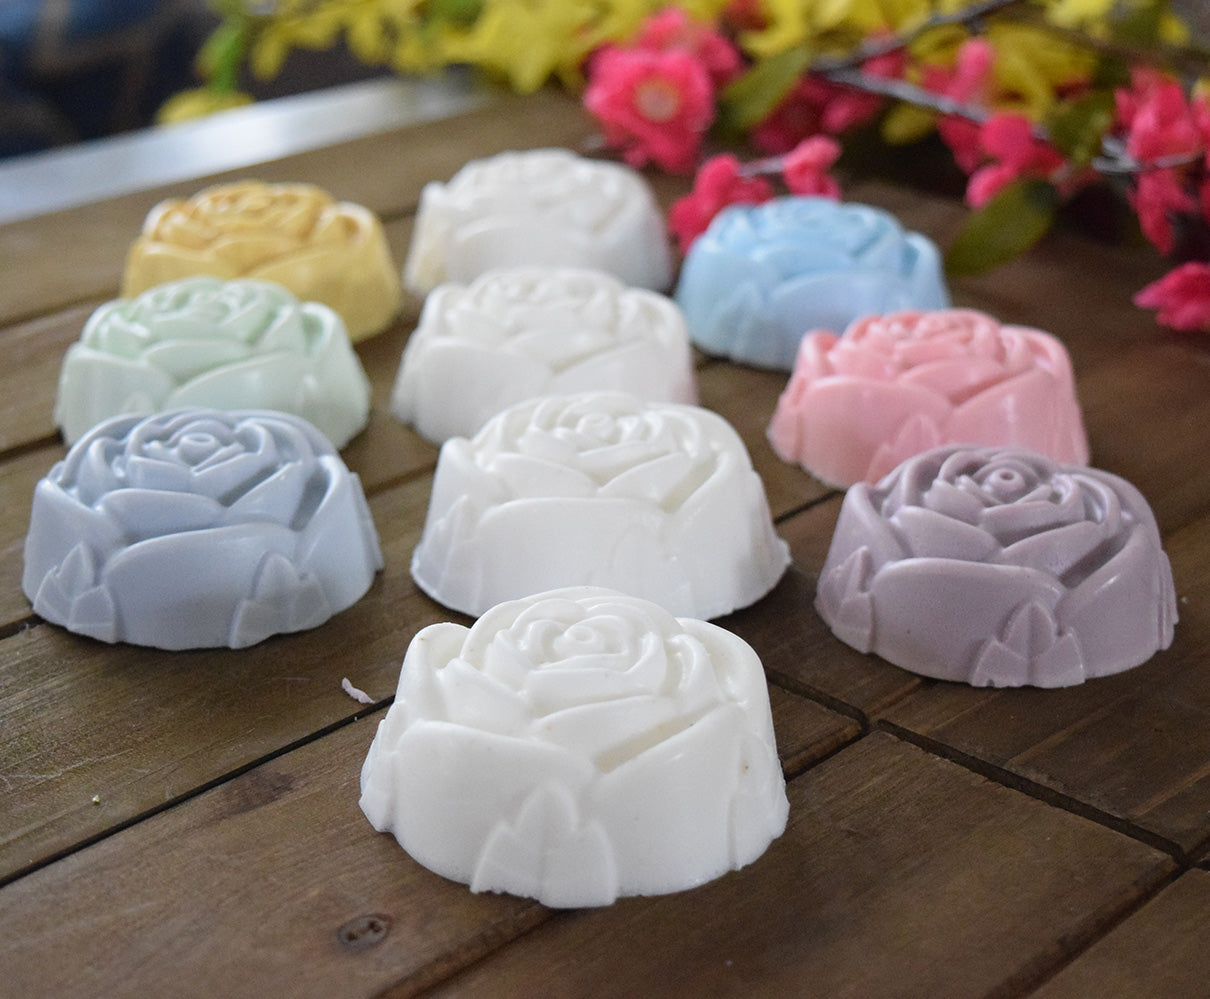 Copy of Decorative Flower Natural Crafted Soap (Circle Shaped) - Kay Pedals wedding gift bag